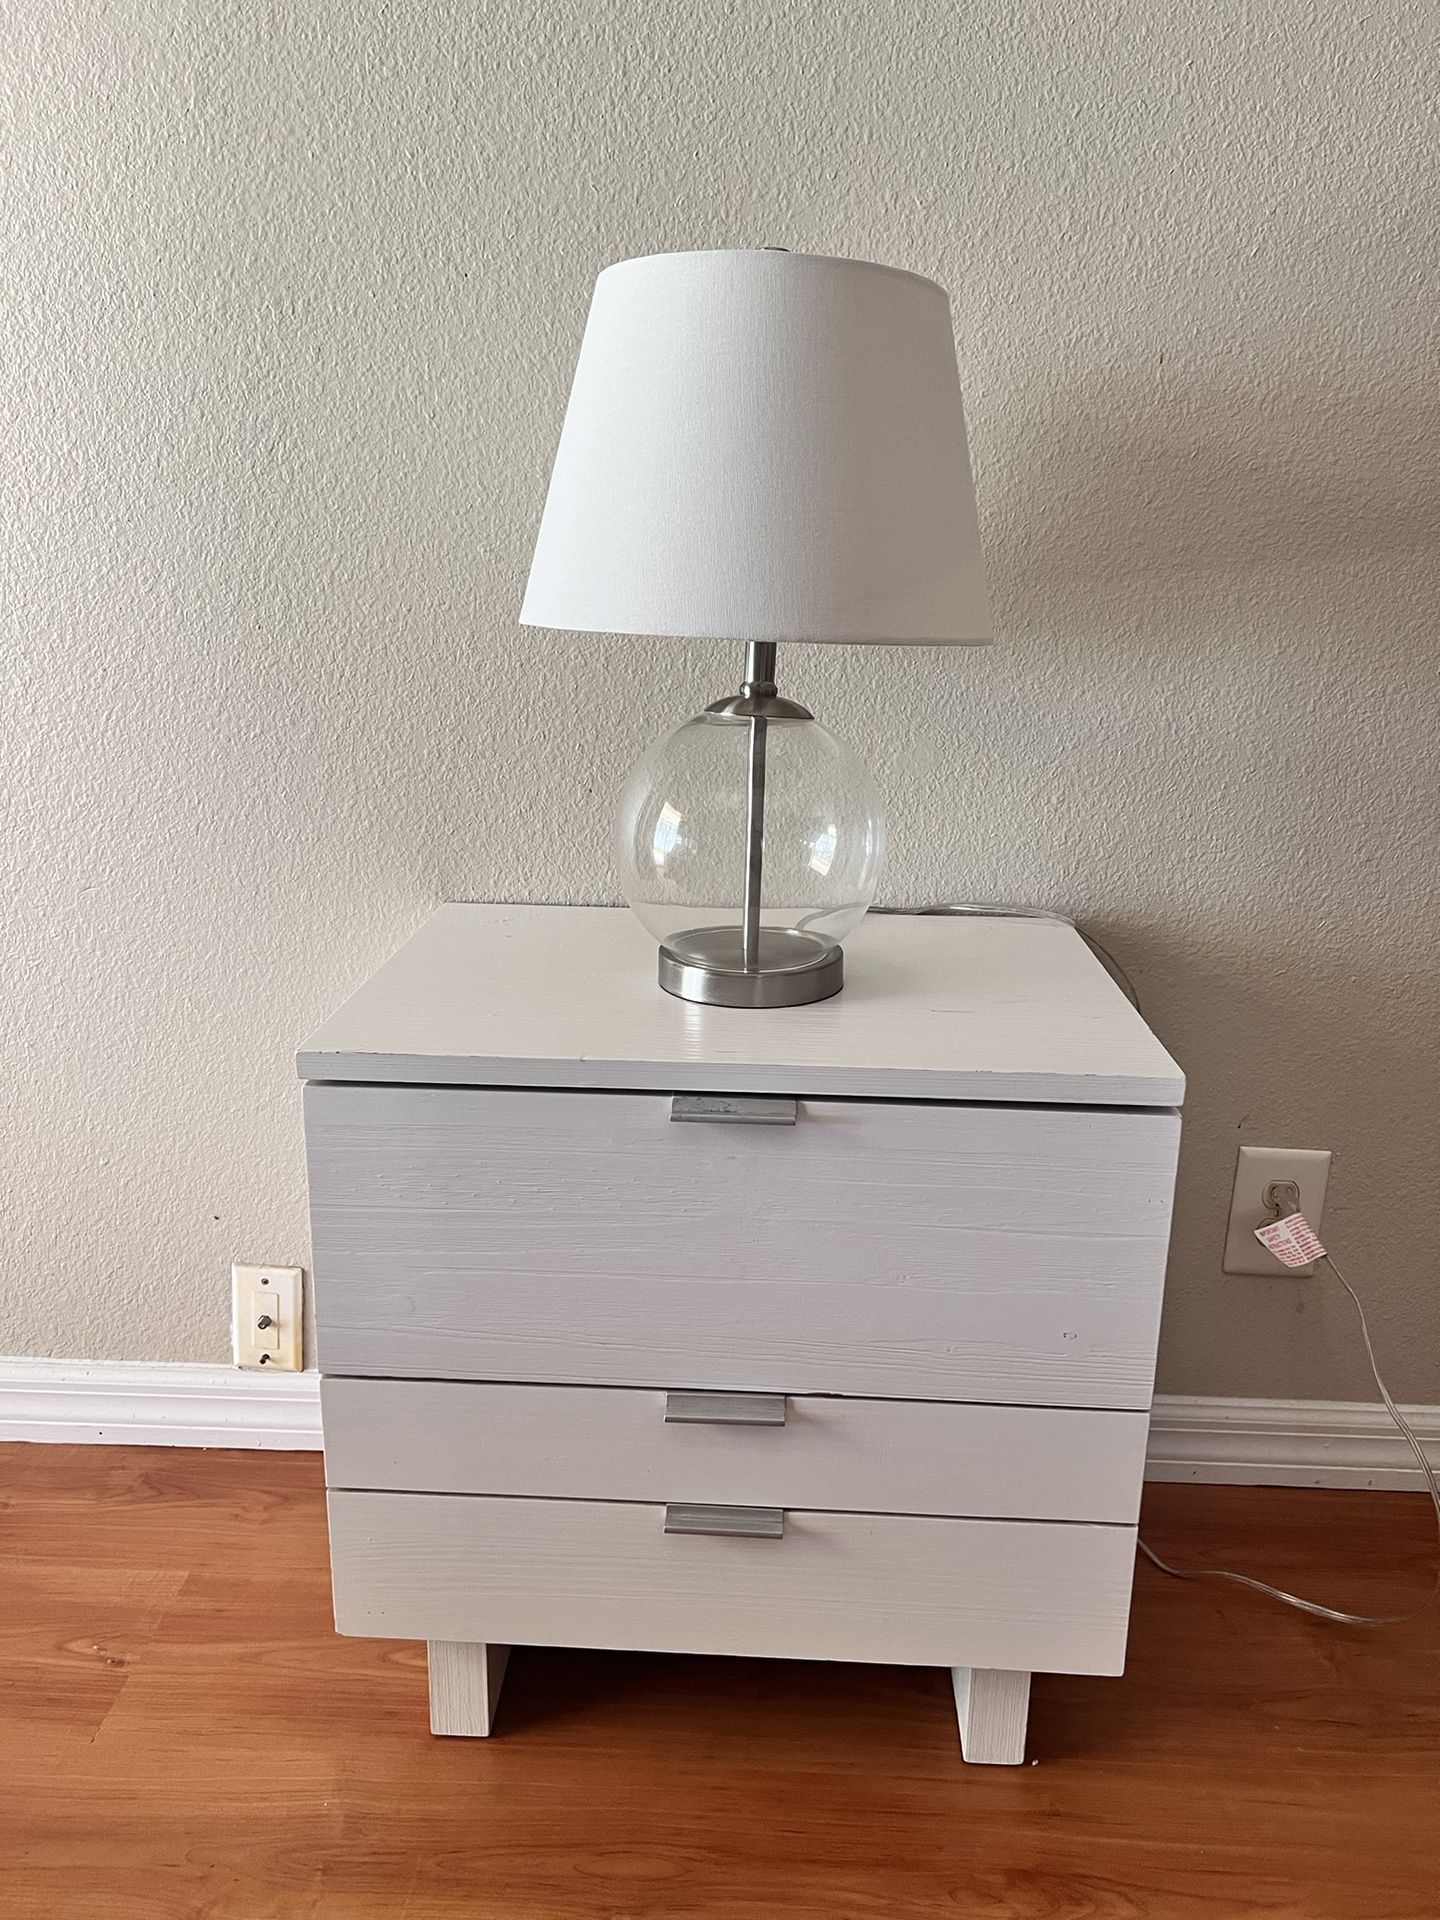 Night Stand With Table Lamp